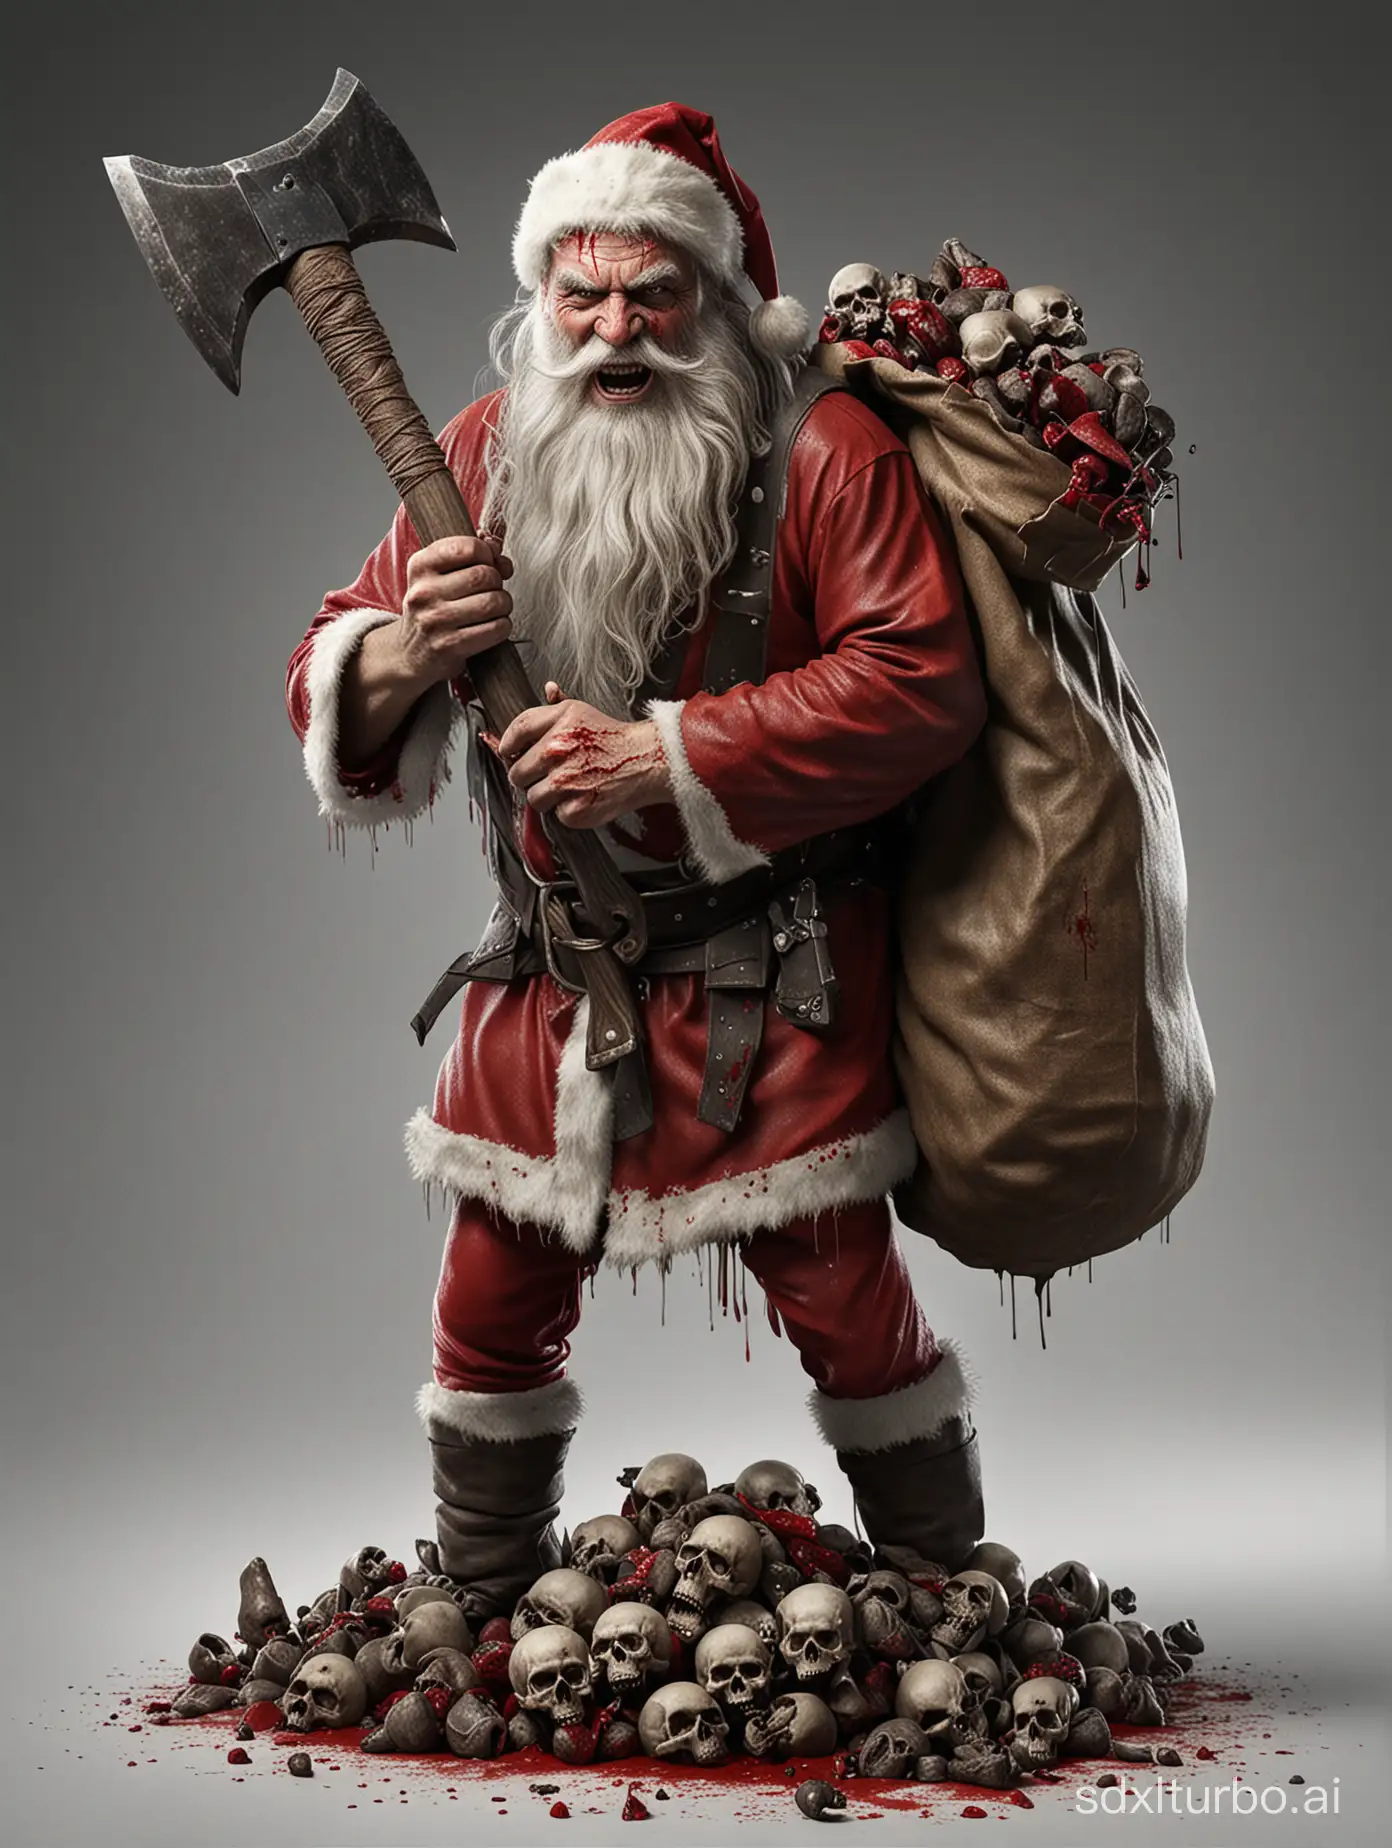 Sinister-Santa-Claus-with-Bloody-Axe-and-Skulls